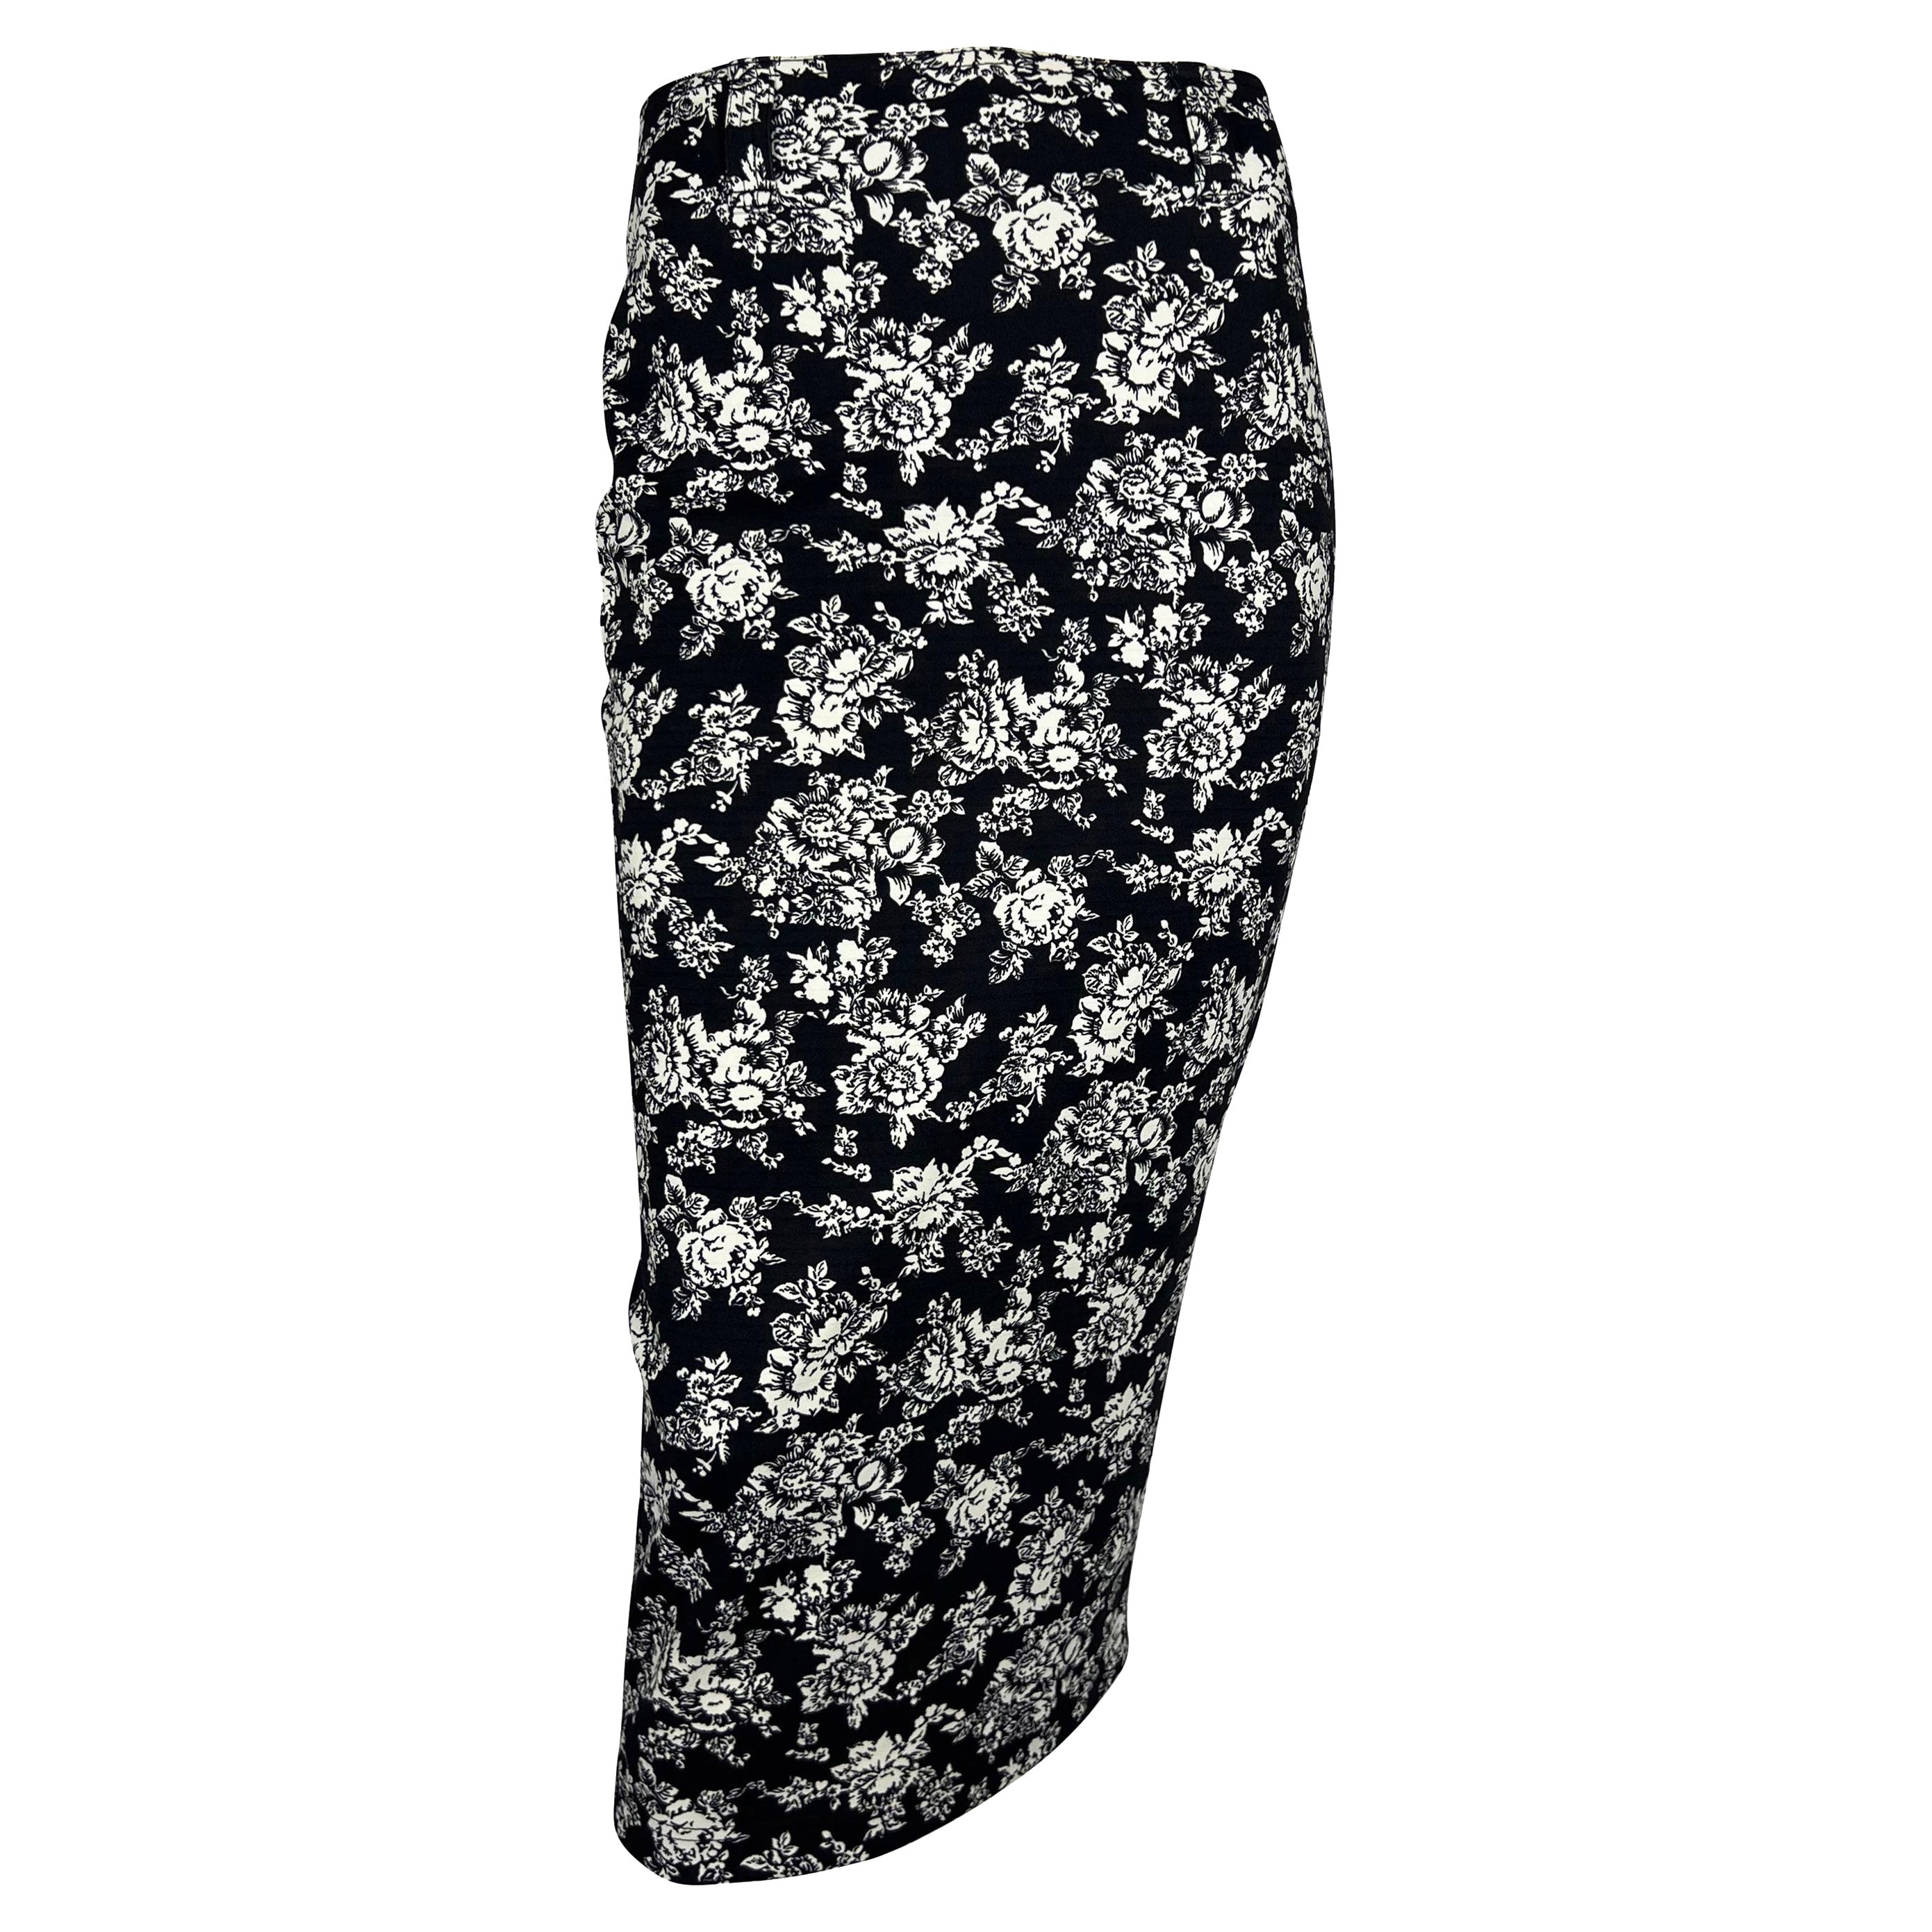 S/S 1993 Gianni Versace Black White Floral Stretch Spandex Rubber Blend Skirt For Sale